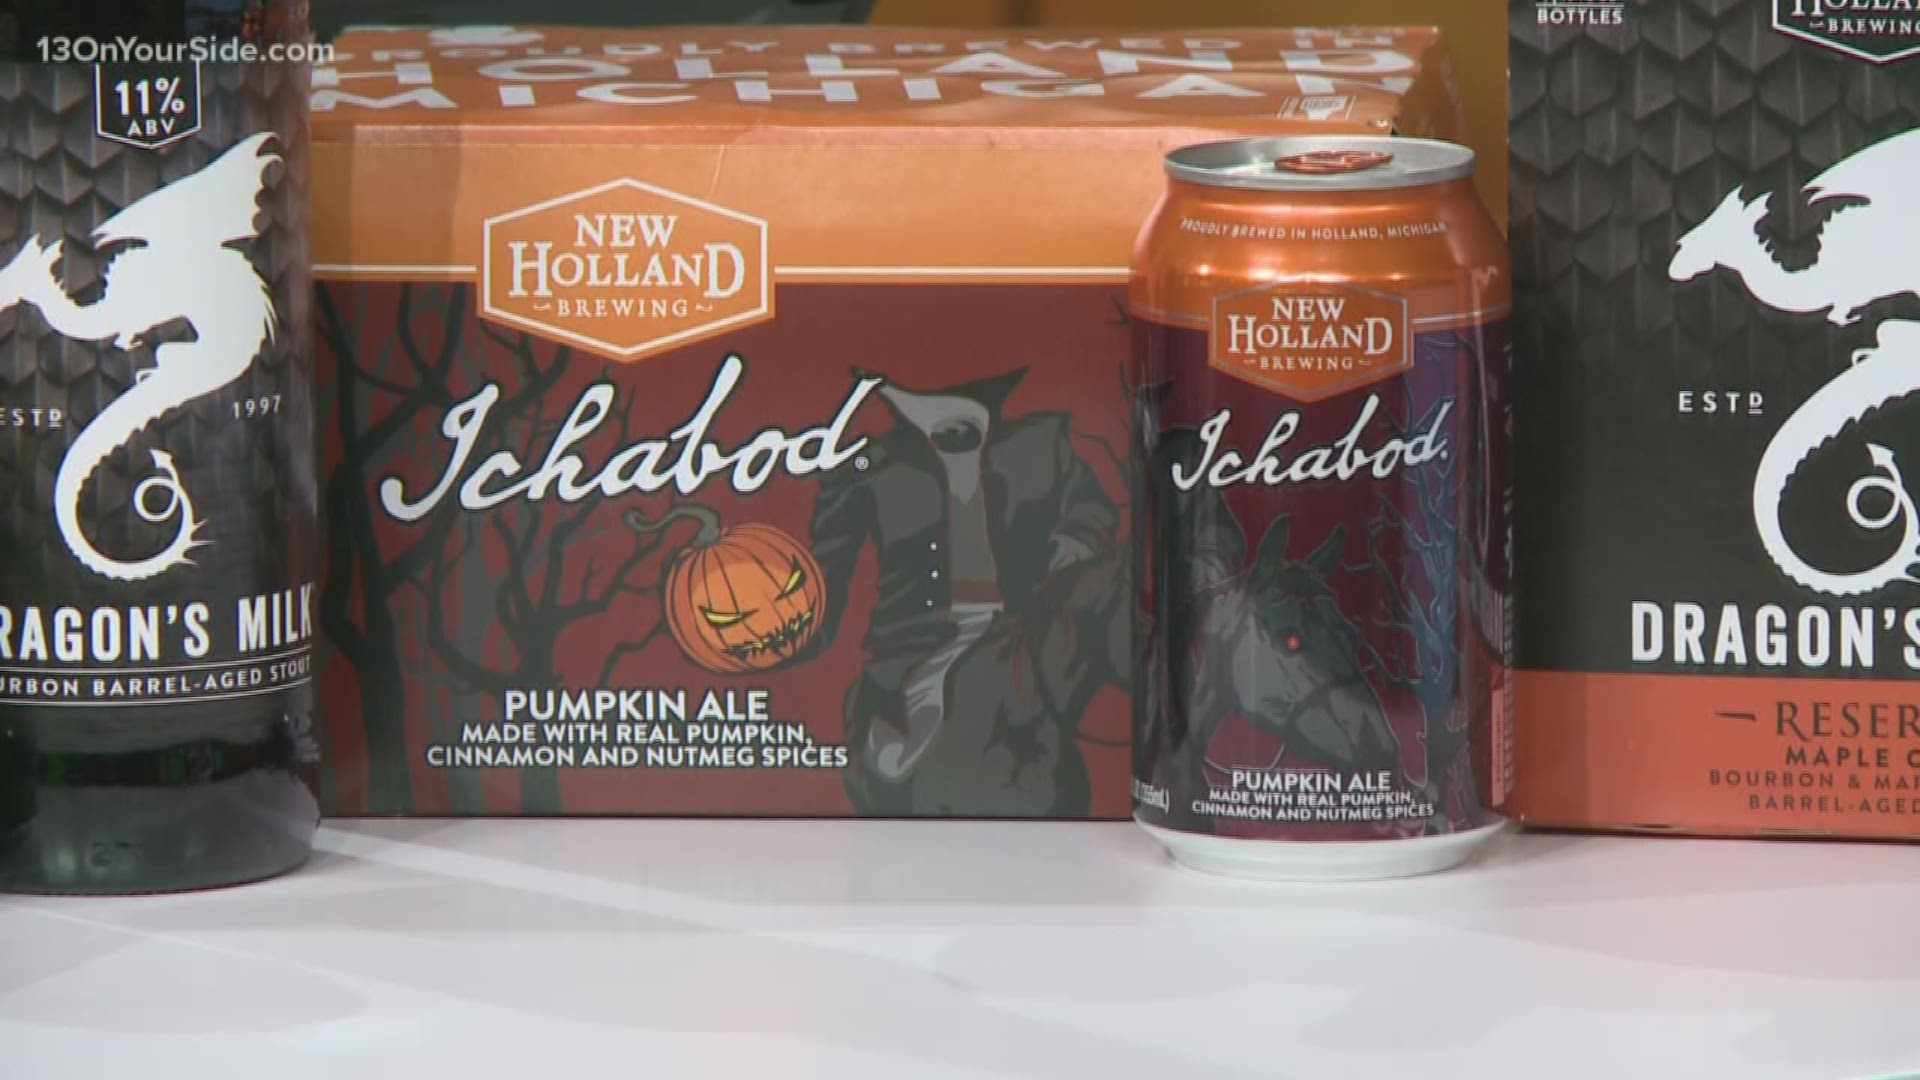 New Holland Brewing is gearing up for fall with the release of Ichabod.